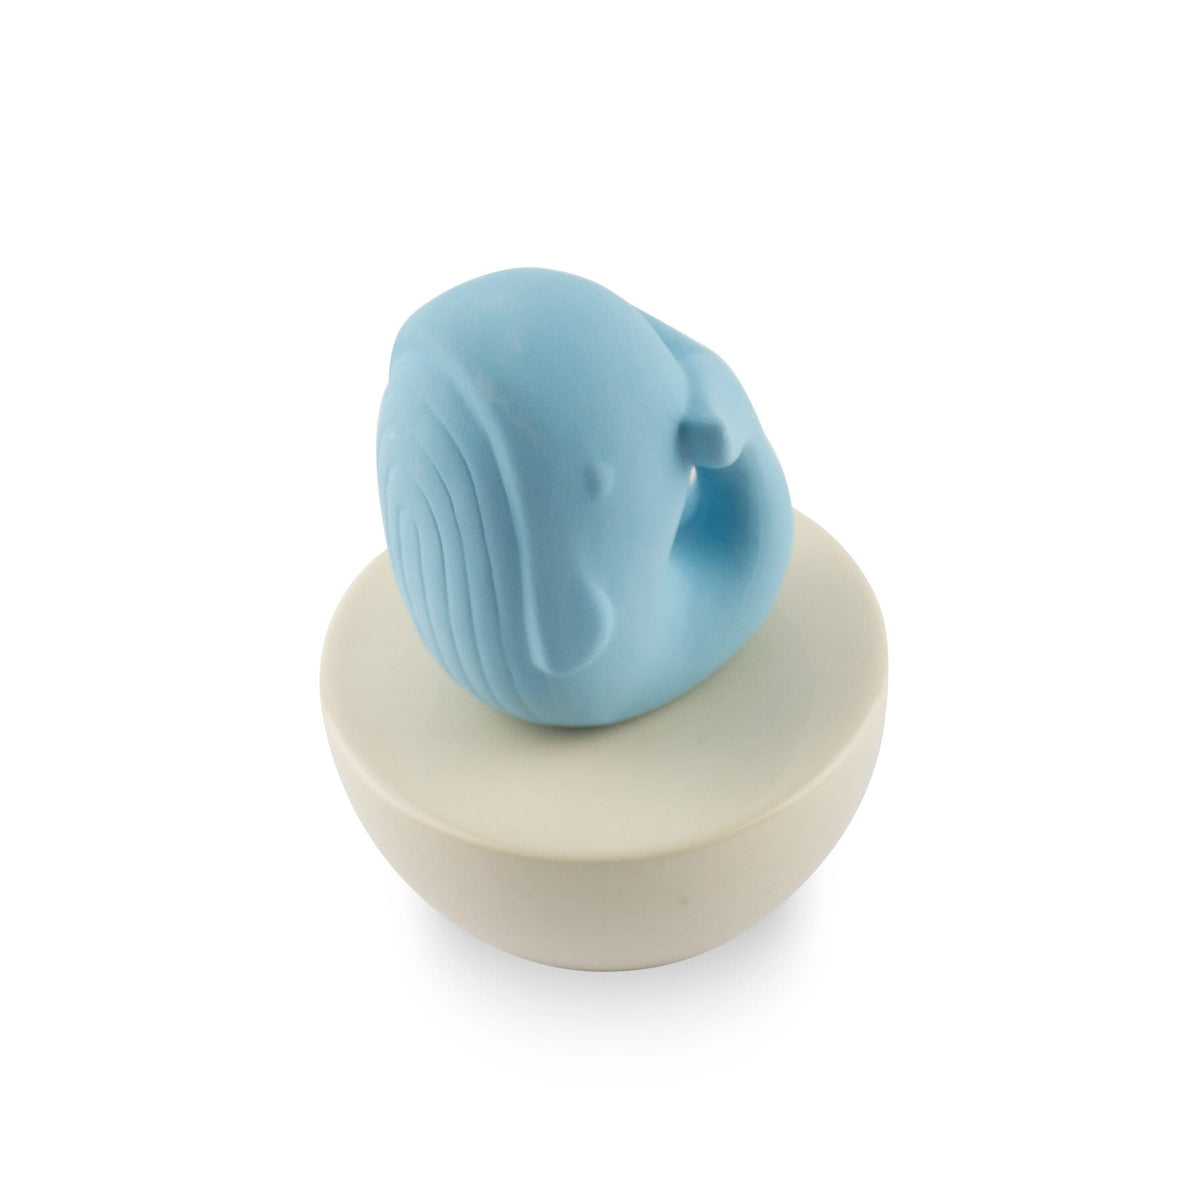 Hysses Home Scents Cutie Scenting Clay Diffuser - Whale